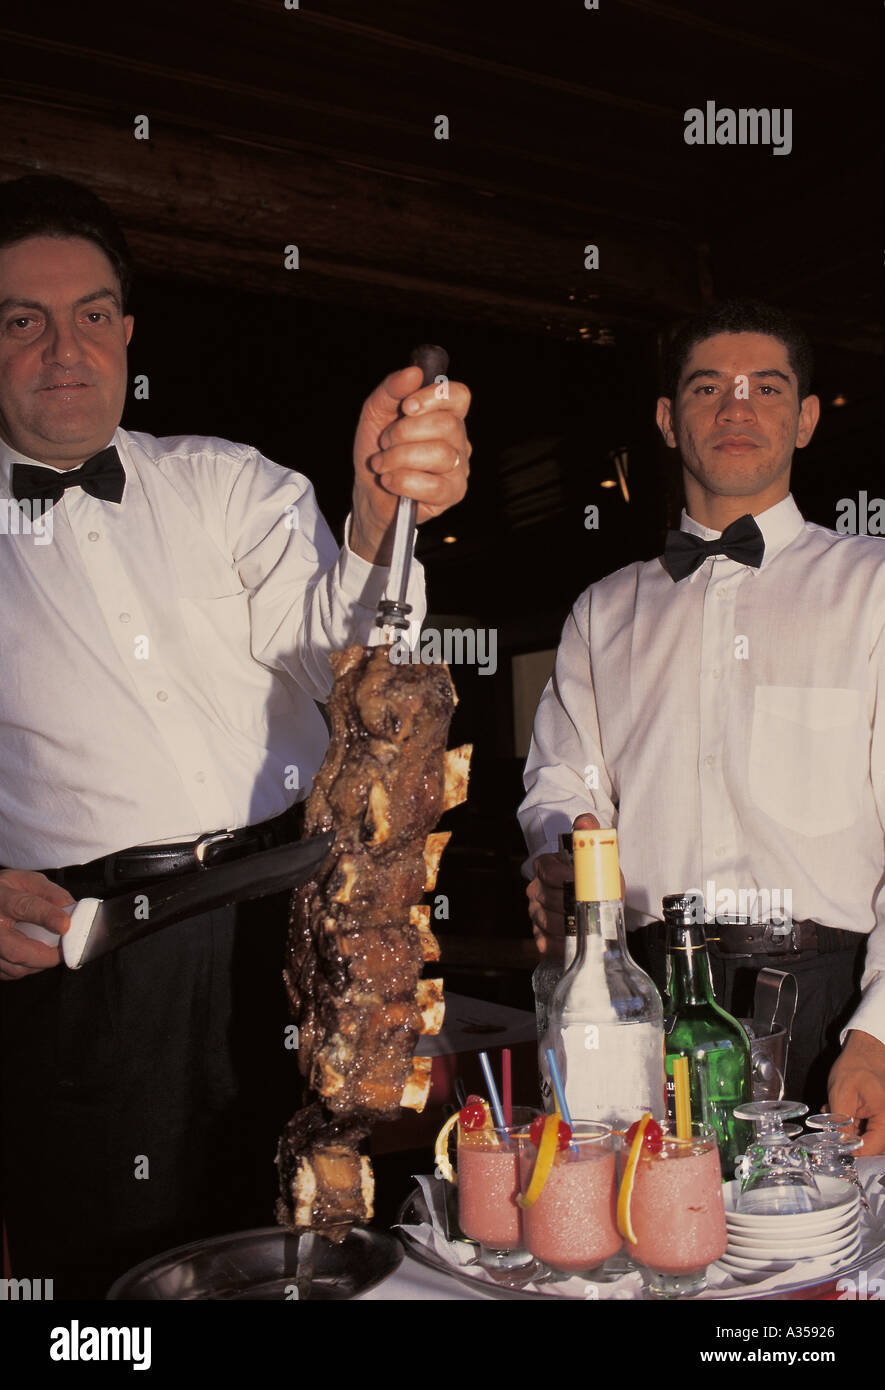 Rio de Janeiro Brazil Waiters slicing meat from a barbecue spit at a churrascaria barbecue house Stock Photo